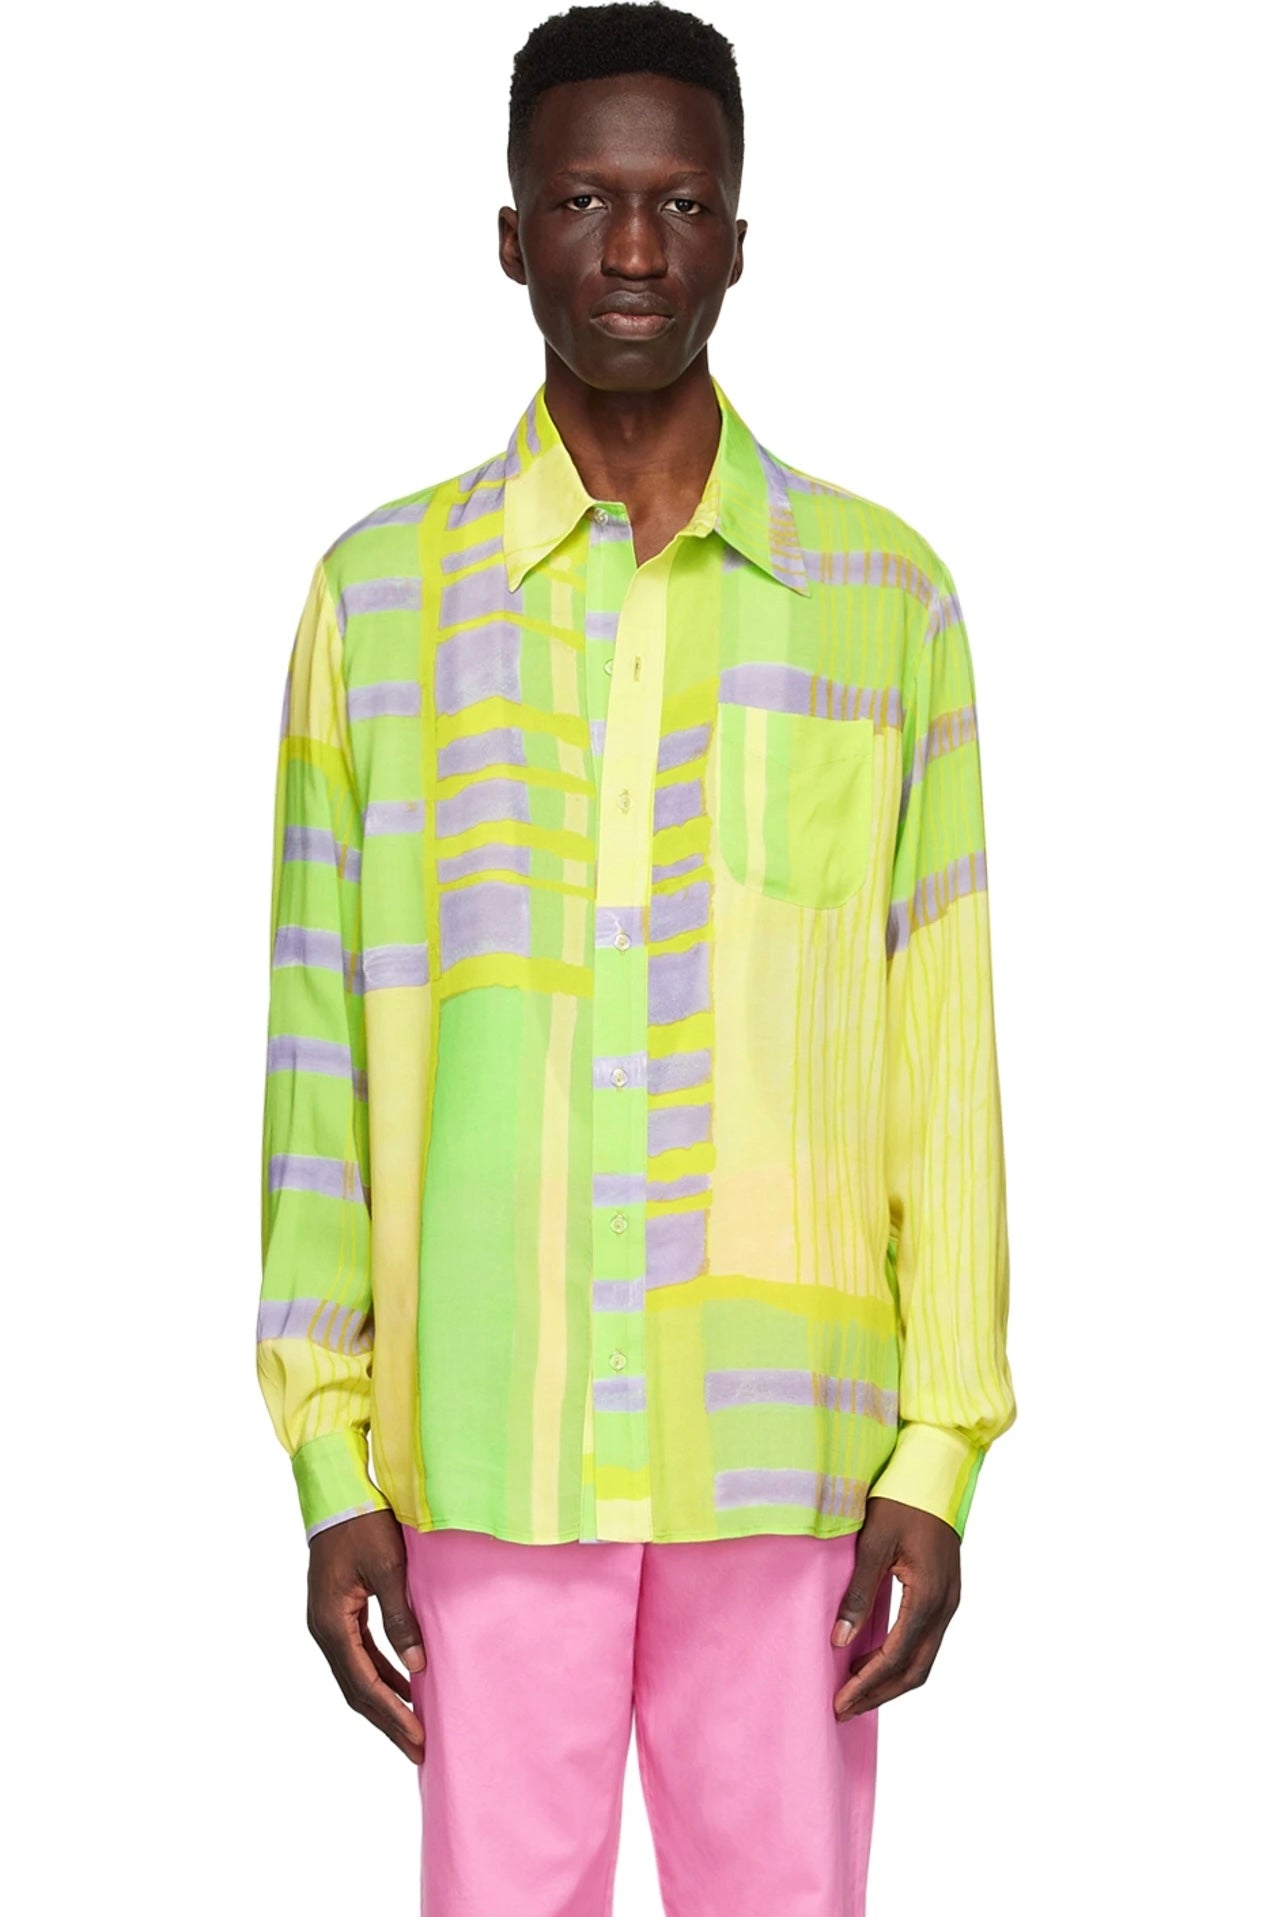 Collina Strada - Convention Button Up: Lime Plaid